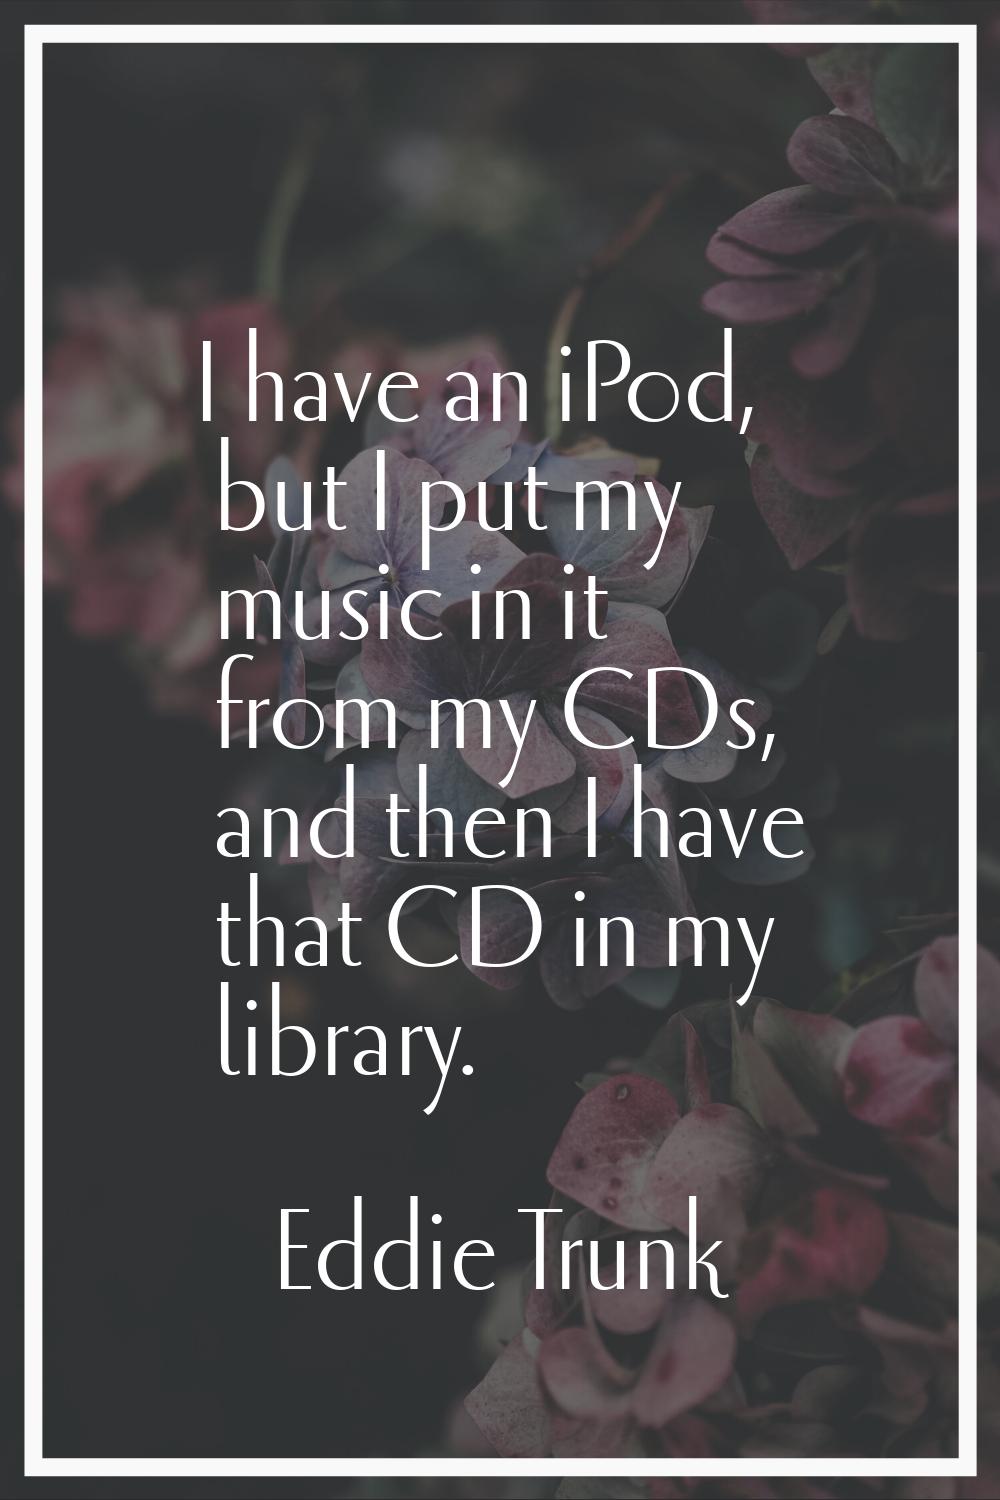 I have an iPod, but I put my music in it from my CDs, and then I have that CD in my library.